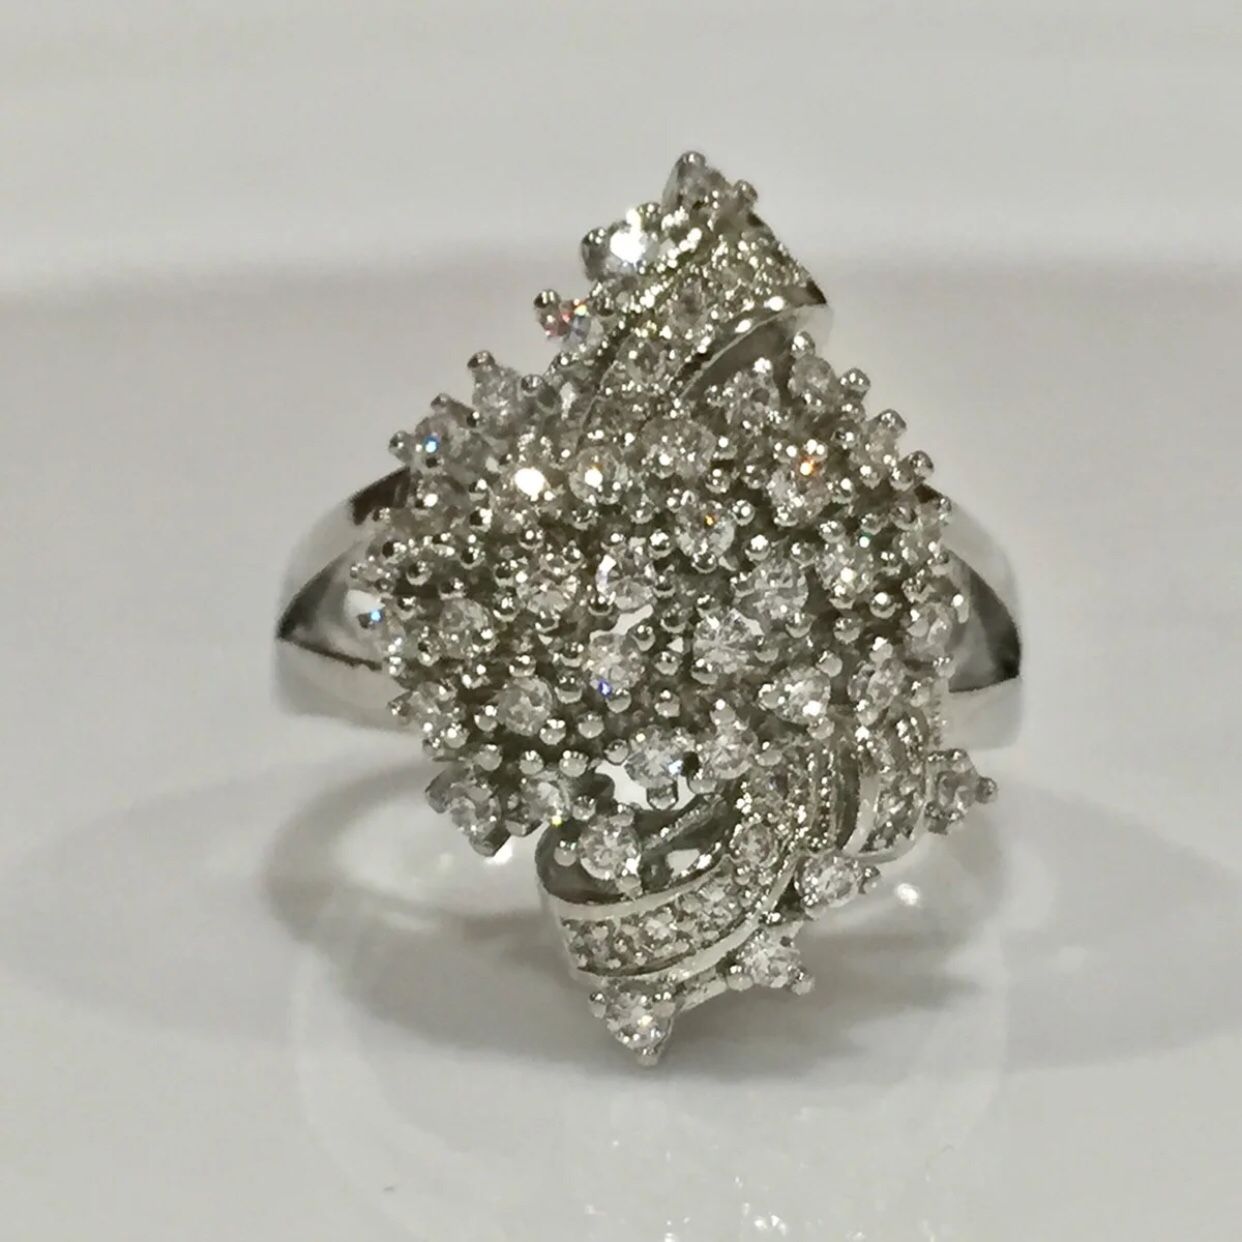 Silver stimulated diamond cluster ring